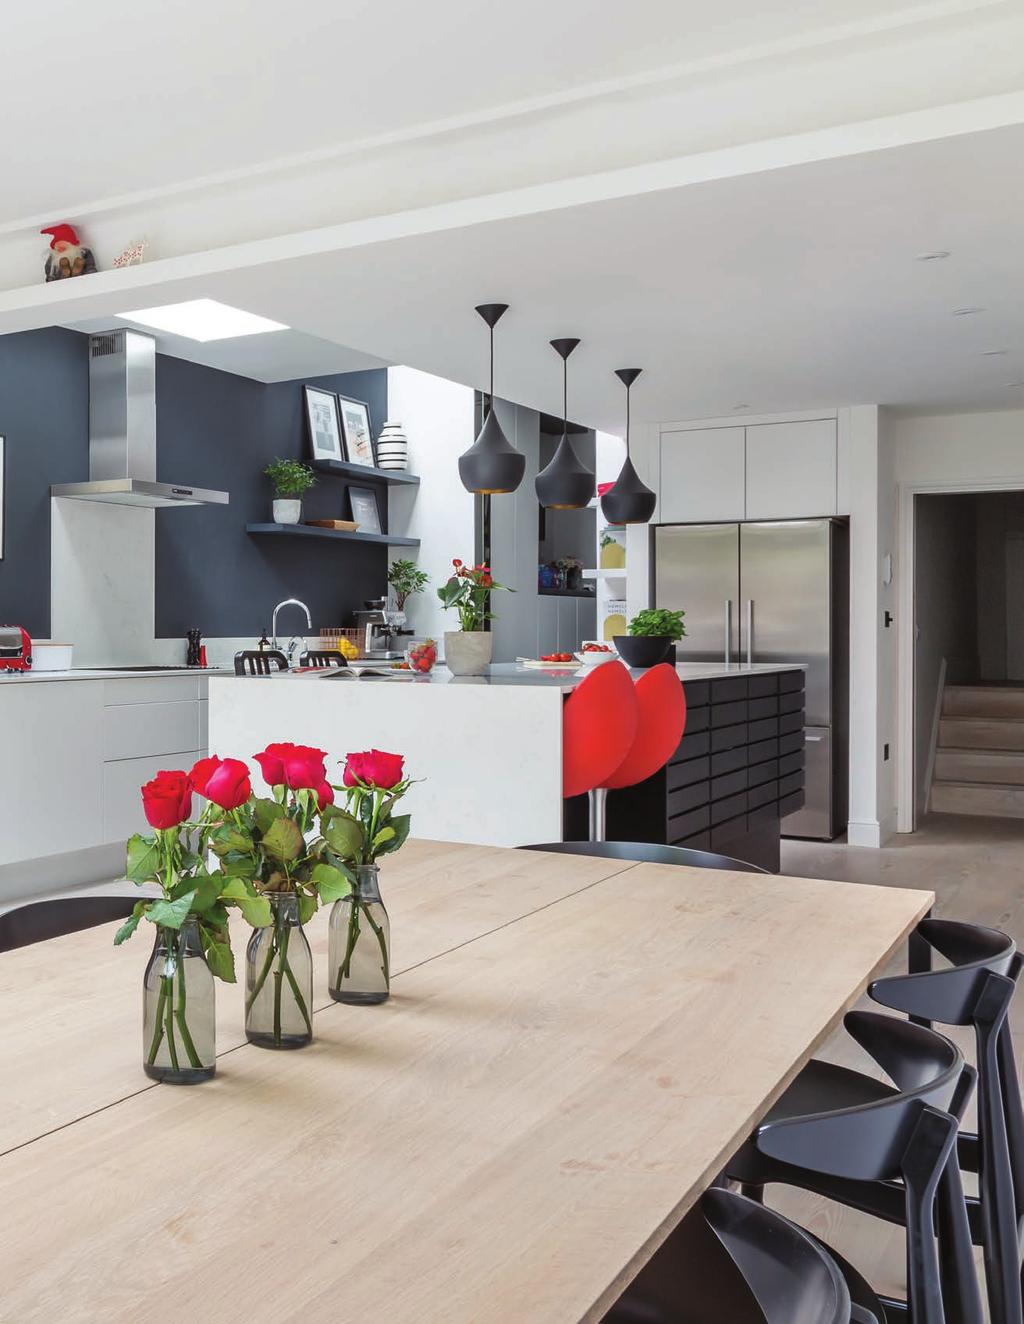 PROJECT RUNWAY Adding a sizeable extension to the home of this fashion forward family, allowed for the creation of their dream kitchen. A sleek linear design was the only way to go.